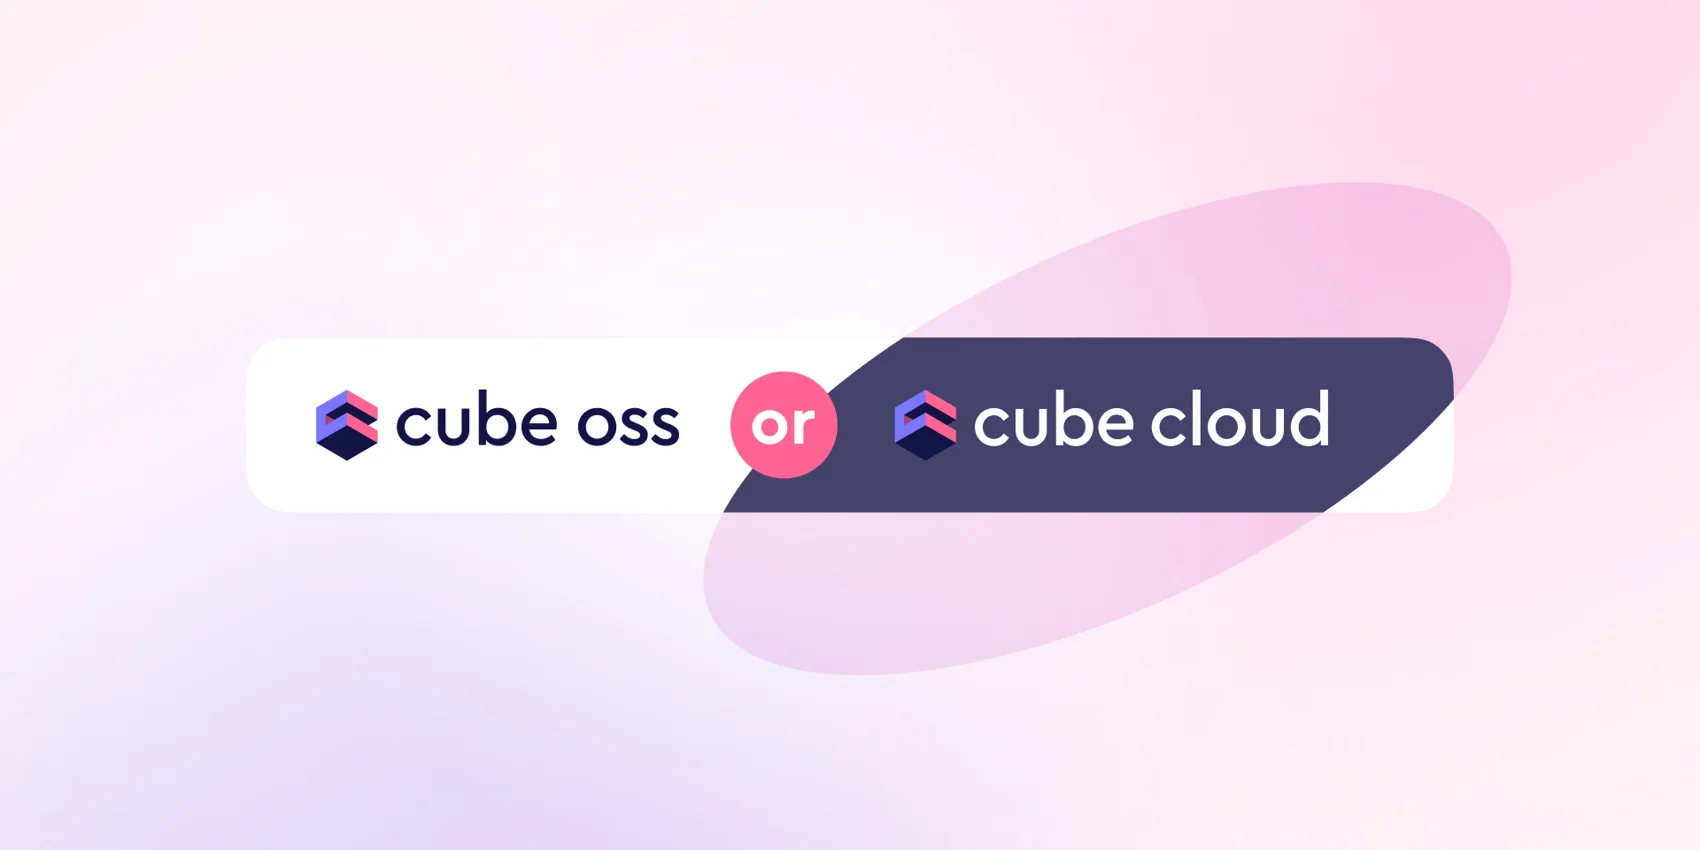 Cover of the 'Building your data stack: Cube Cloud or OSS ' blog post